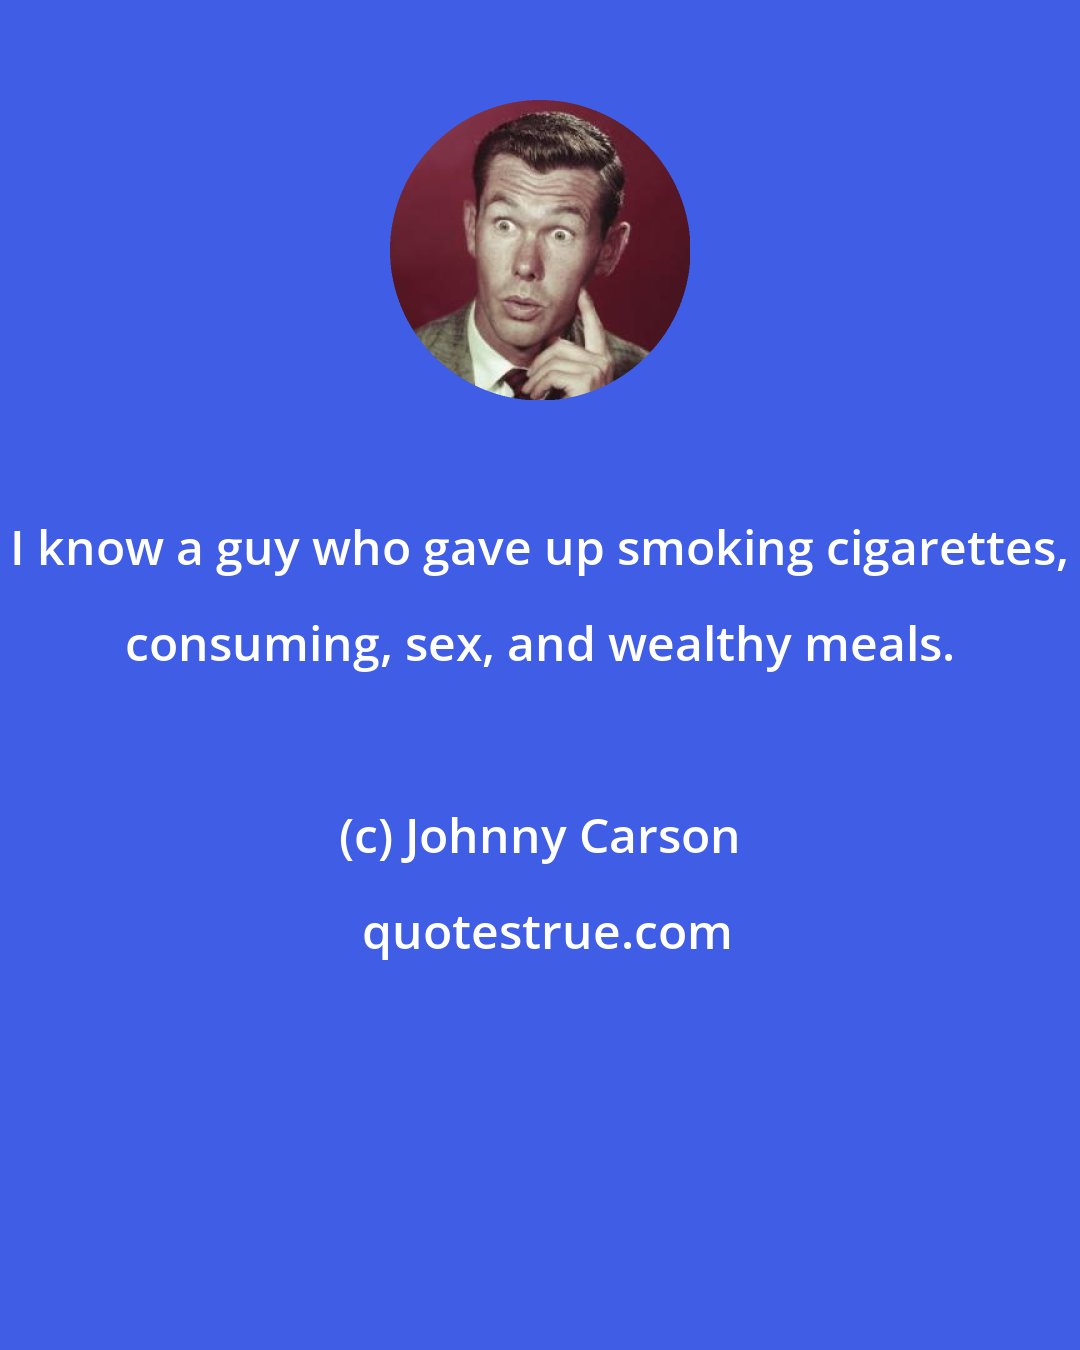 Johnny Carson: I know a guy who gave up smoking cigarettes, consuming, sex, and wealthy meals.